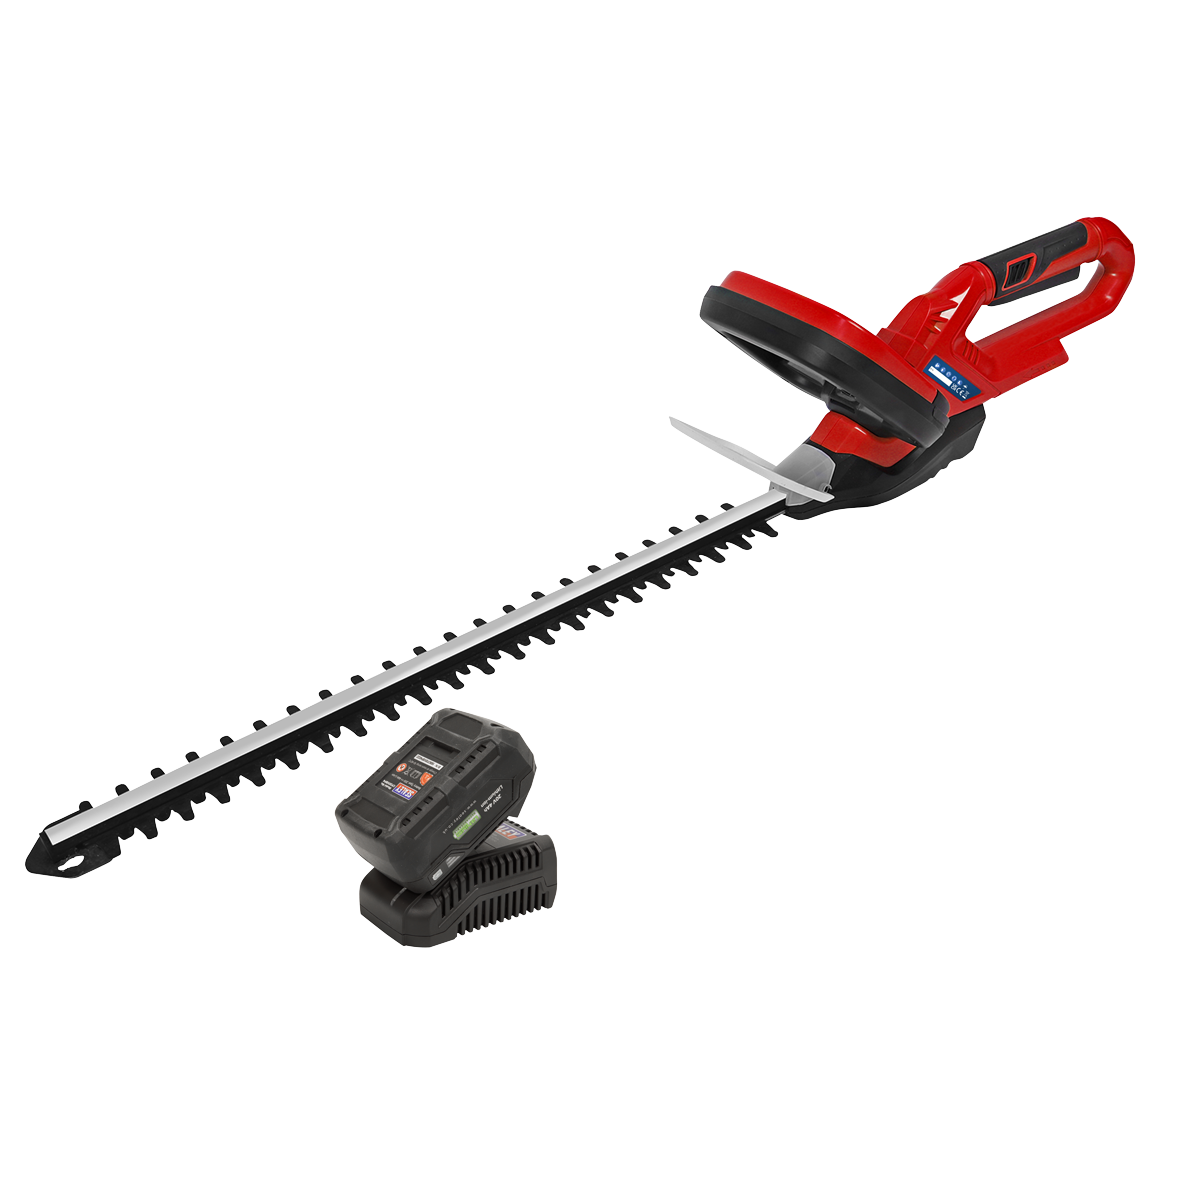 Sealey Hedge Trimmer Cordless 20V SV20 Series with 4Ah Battery & Charger CHT20VCOMBO4